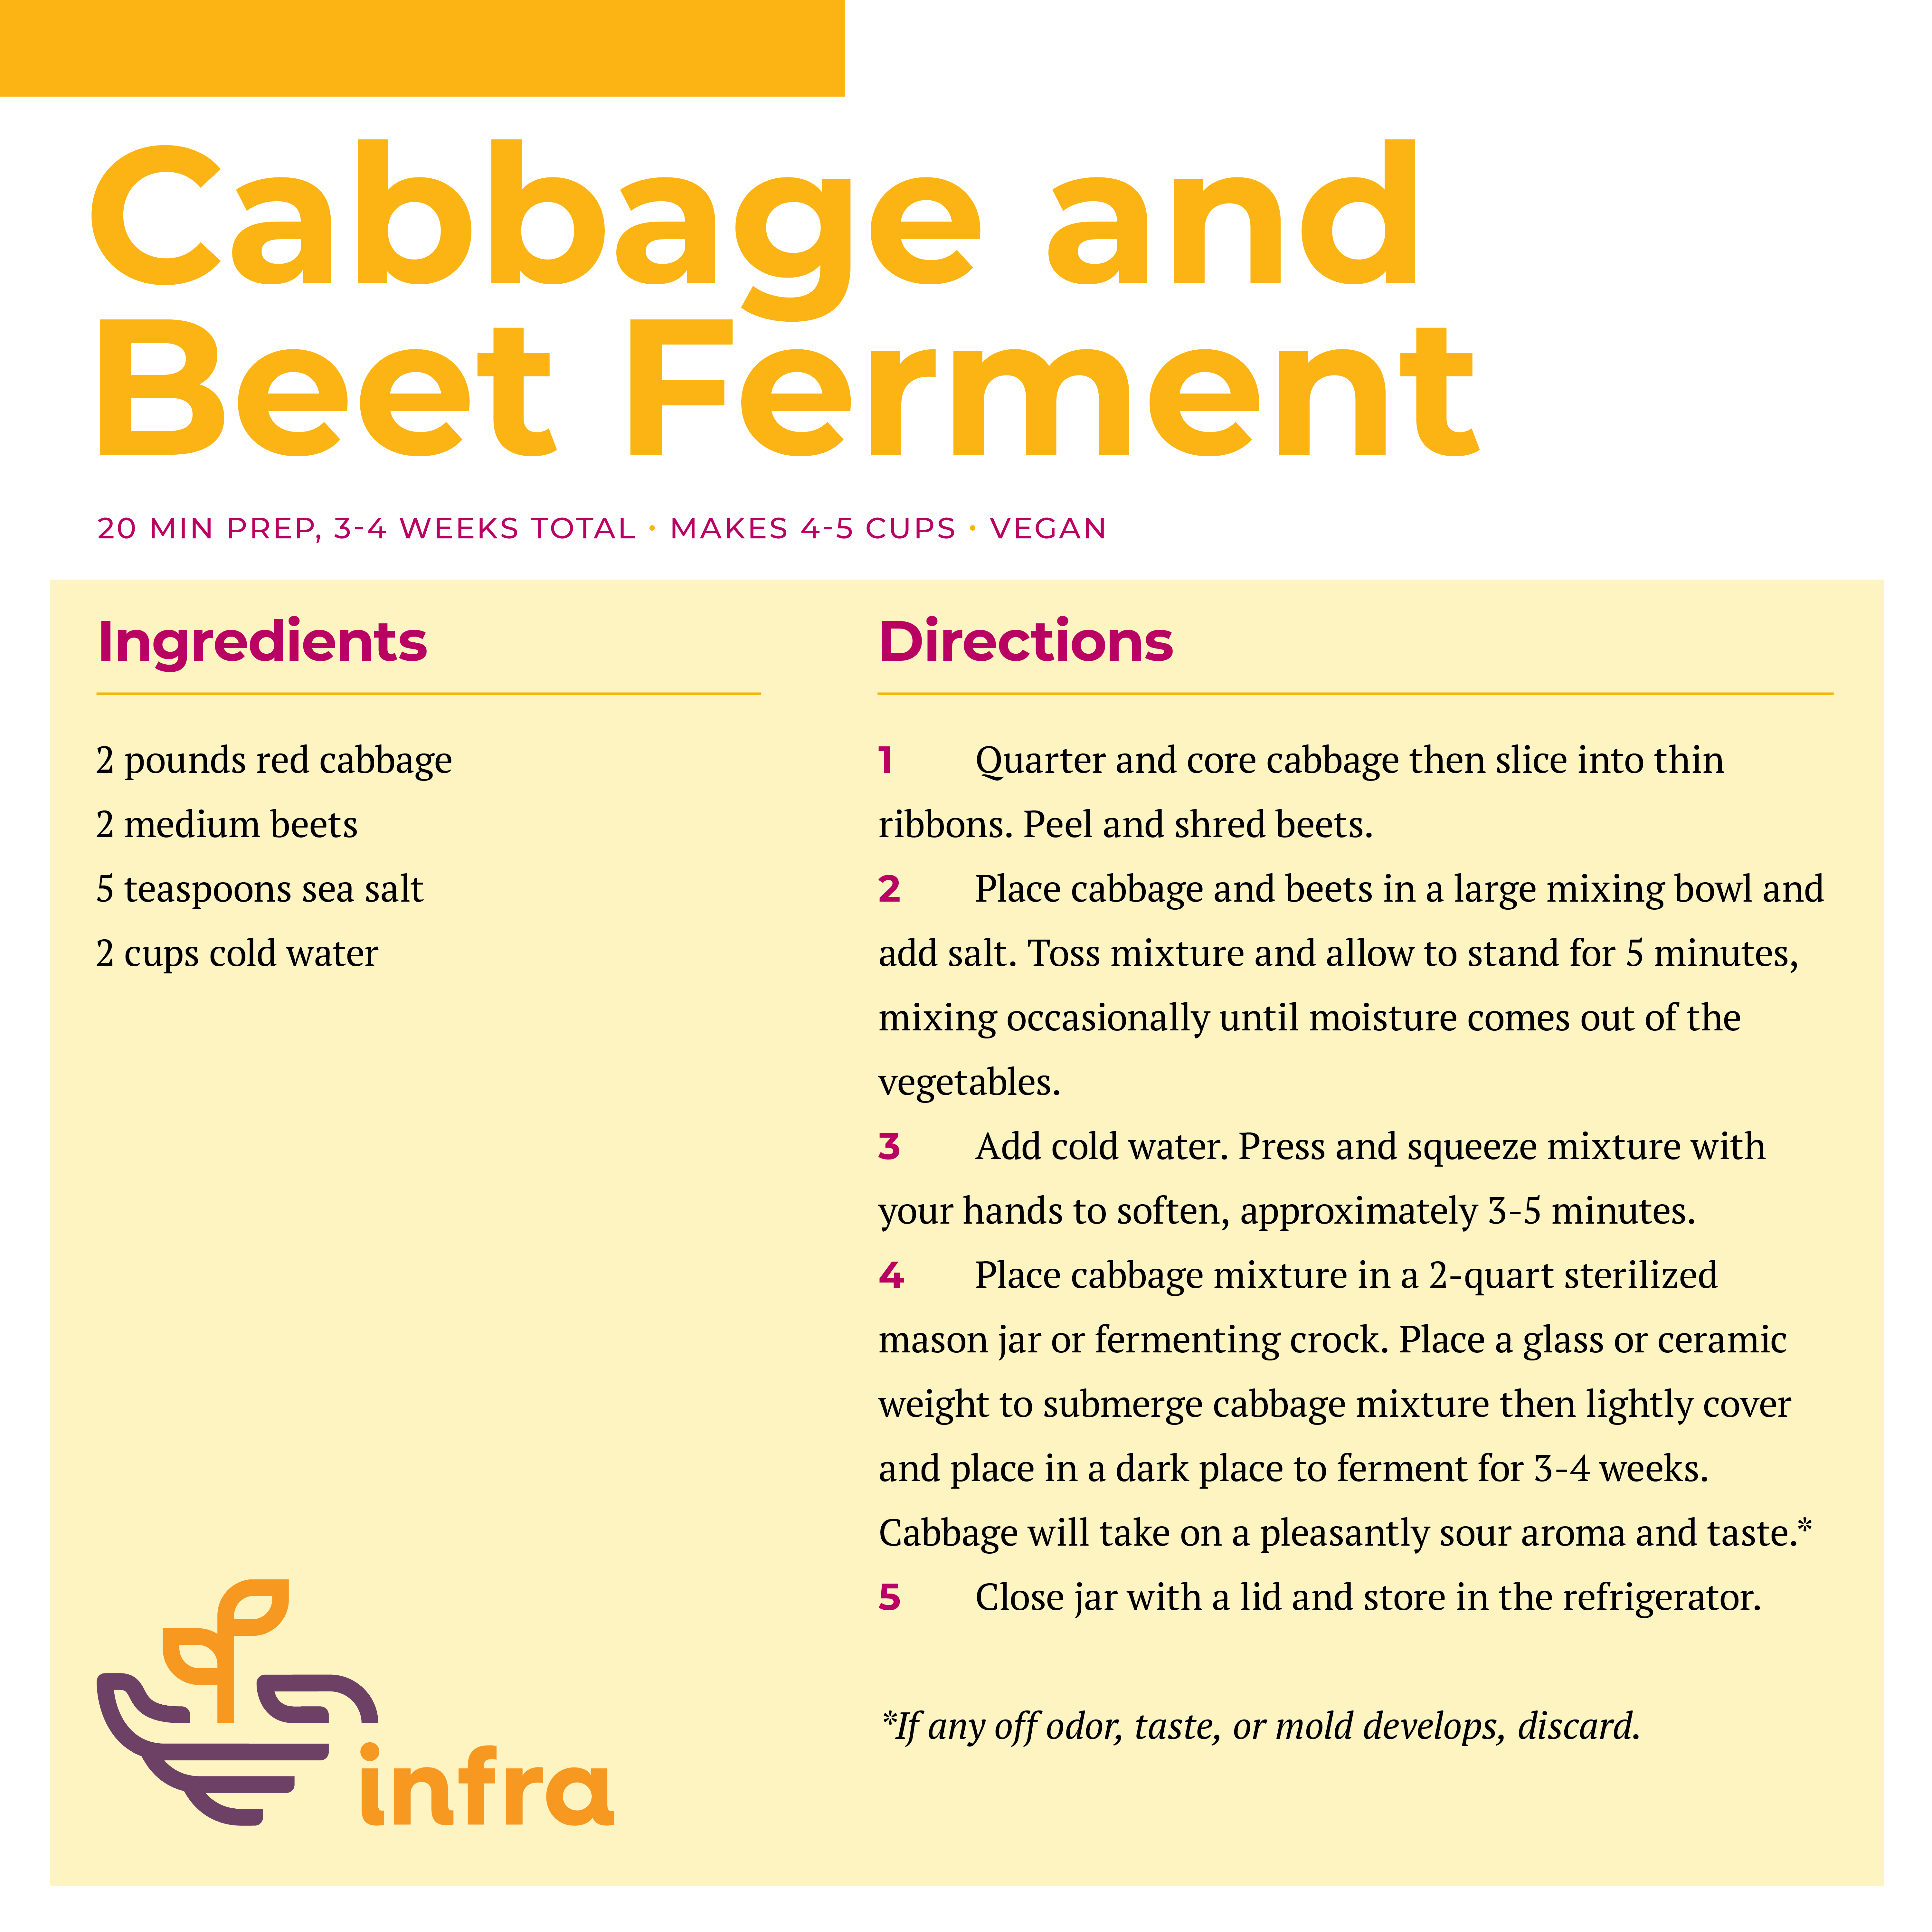 Cabbage and Beet Ferment